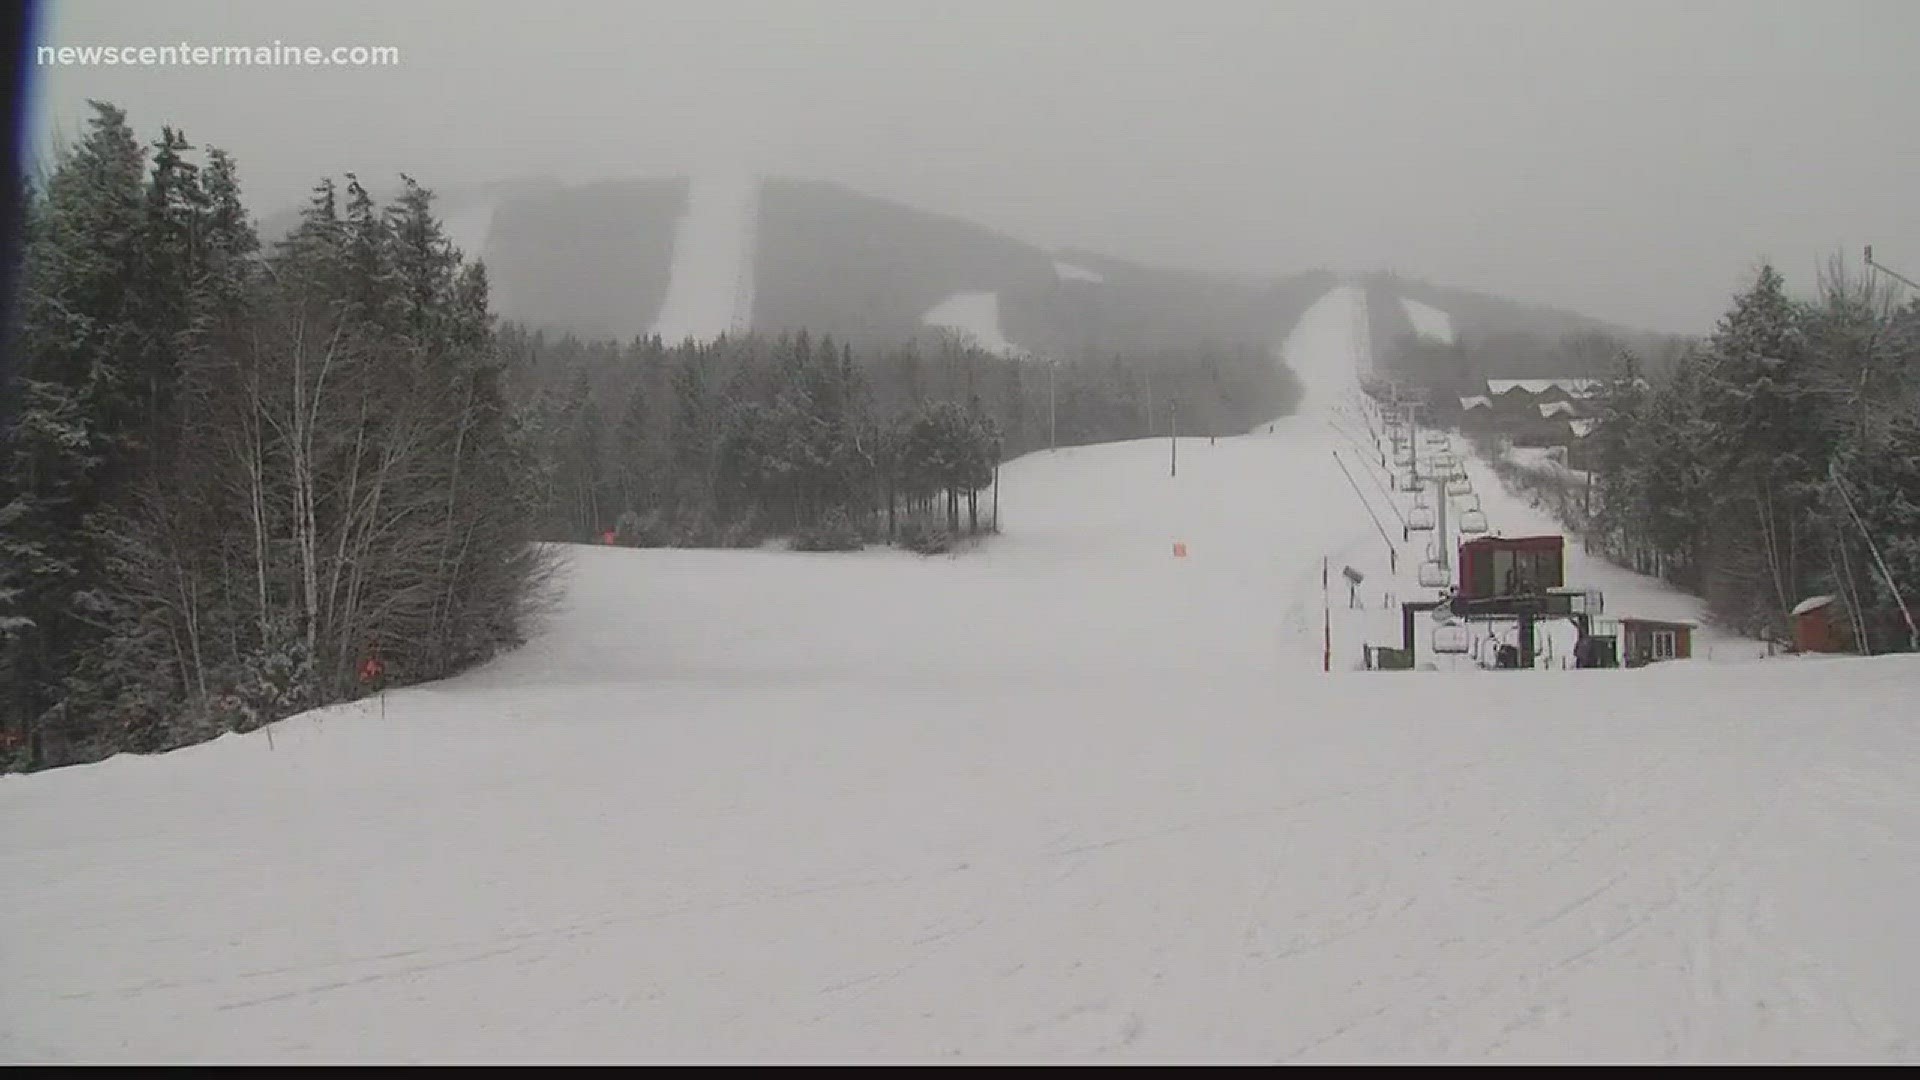 One teen killed, another injured in a sledding accident at Sunday River